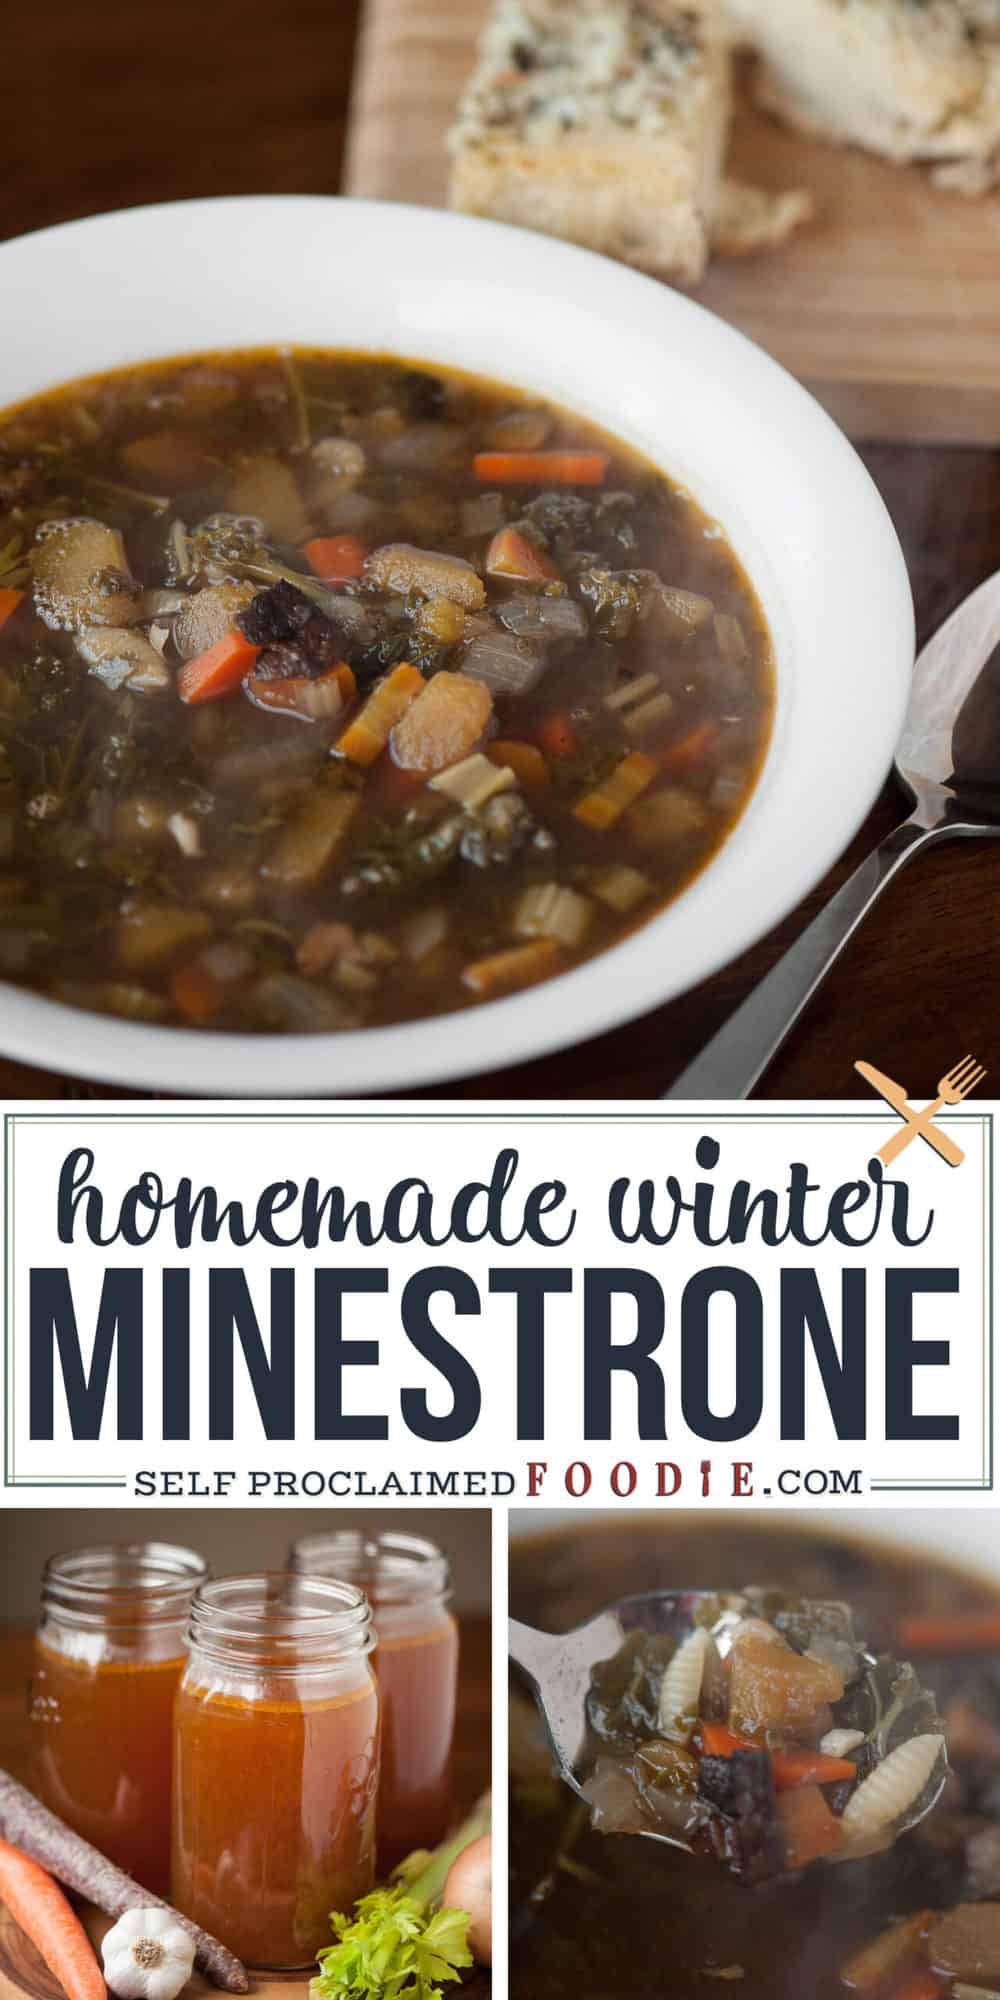 Winter Minestrone Soup Recipe - Self Proclaimed Foodie